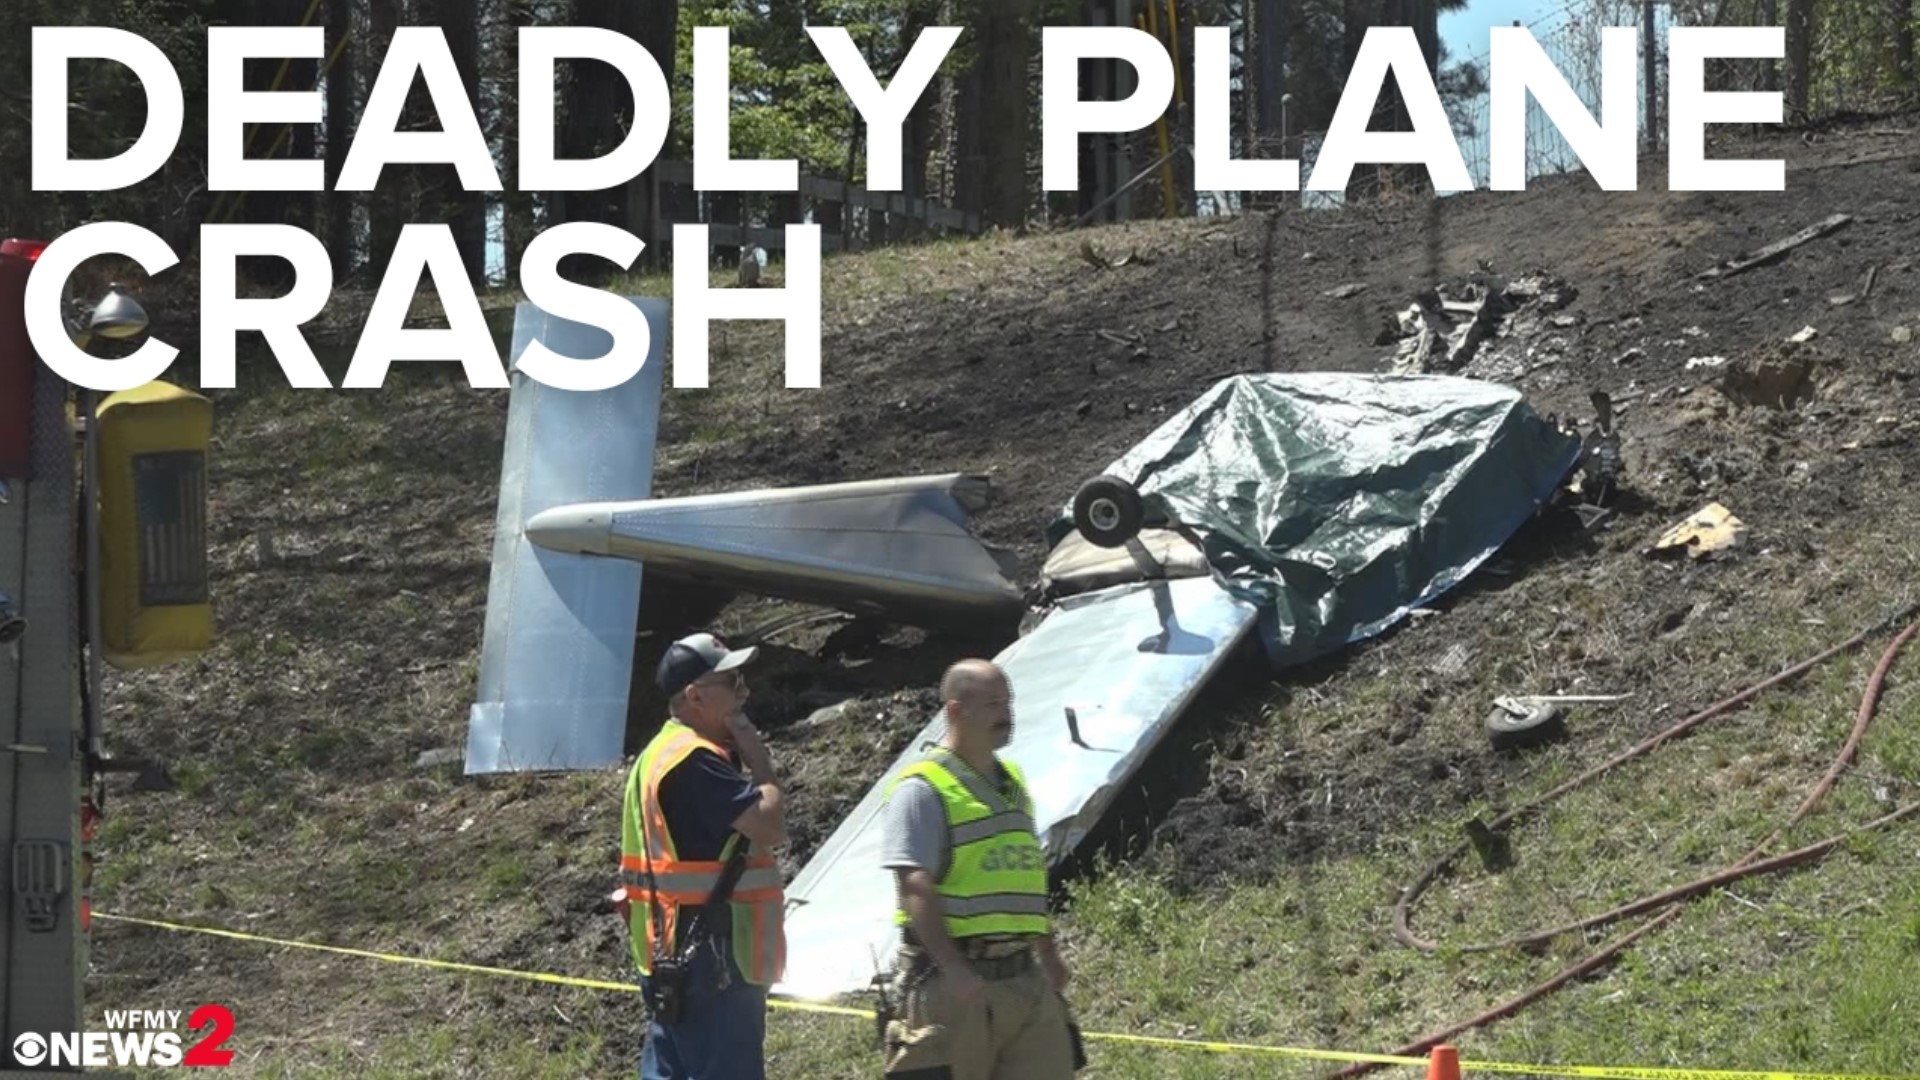 The FAA and the National Transportation Safety Board (NTSB) are investigating the cause of the crash.